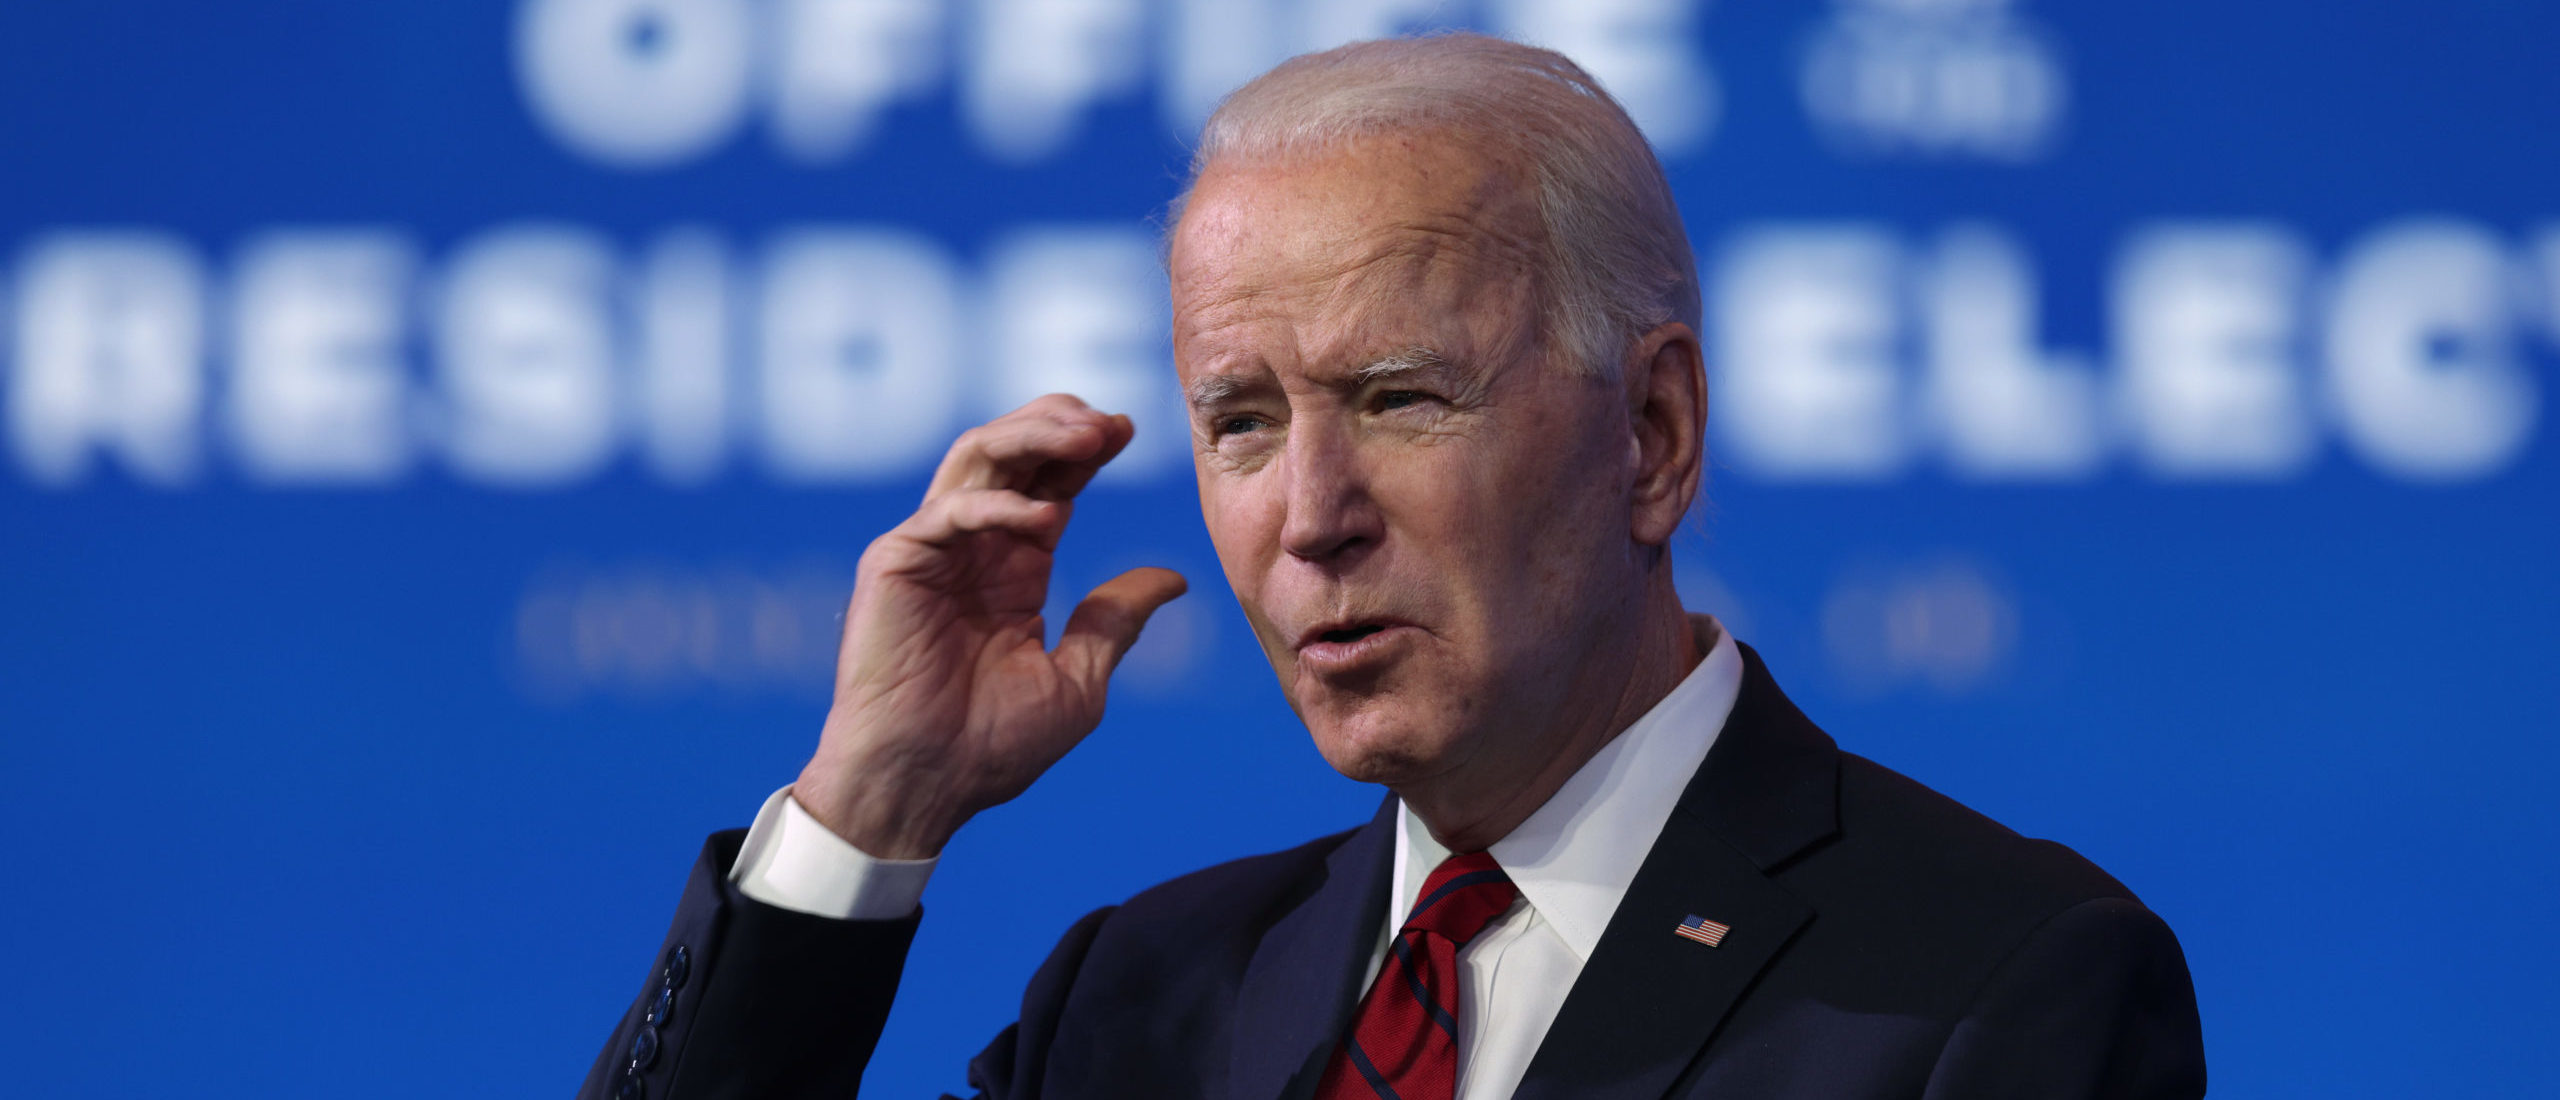 biden-expected-to-be-tougher-on-china-than-previous-democratic-administrations